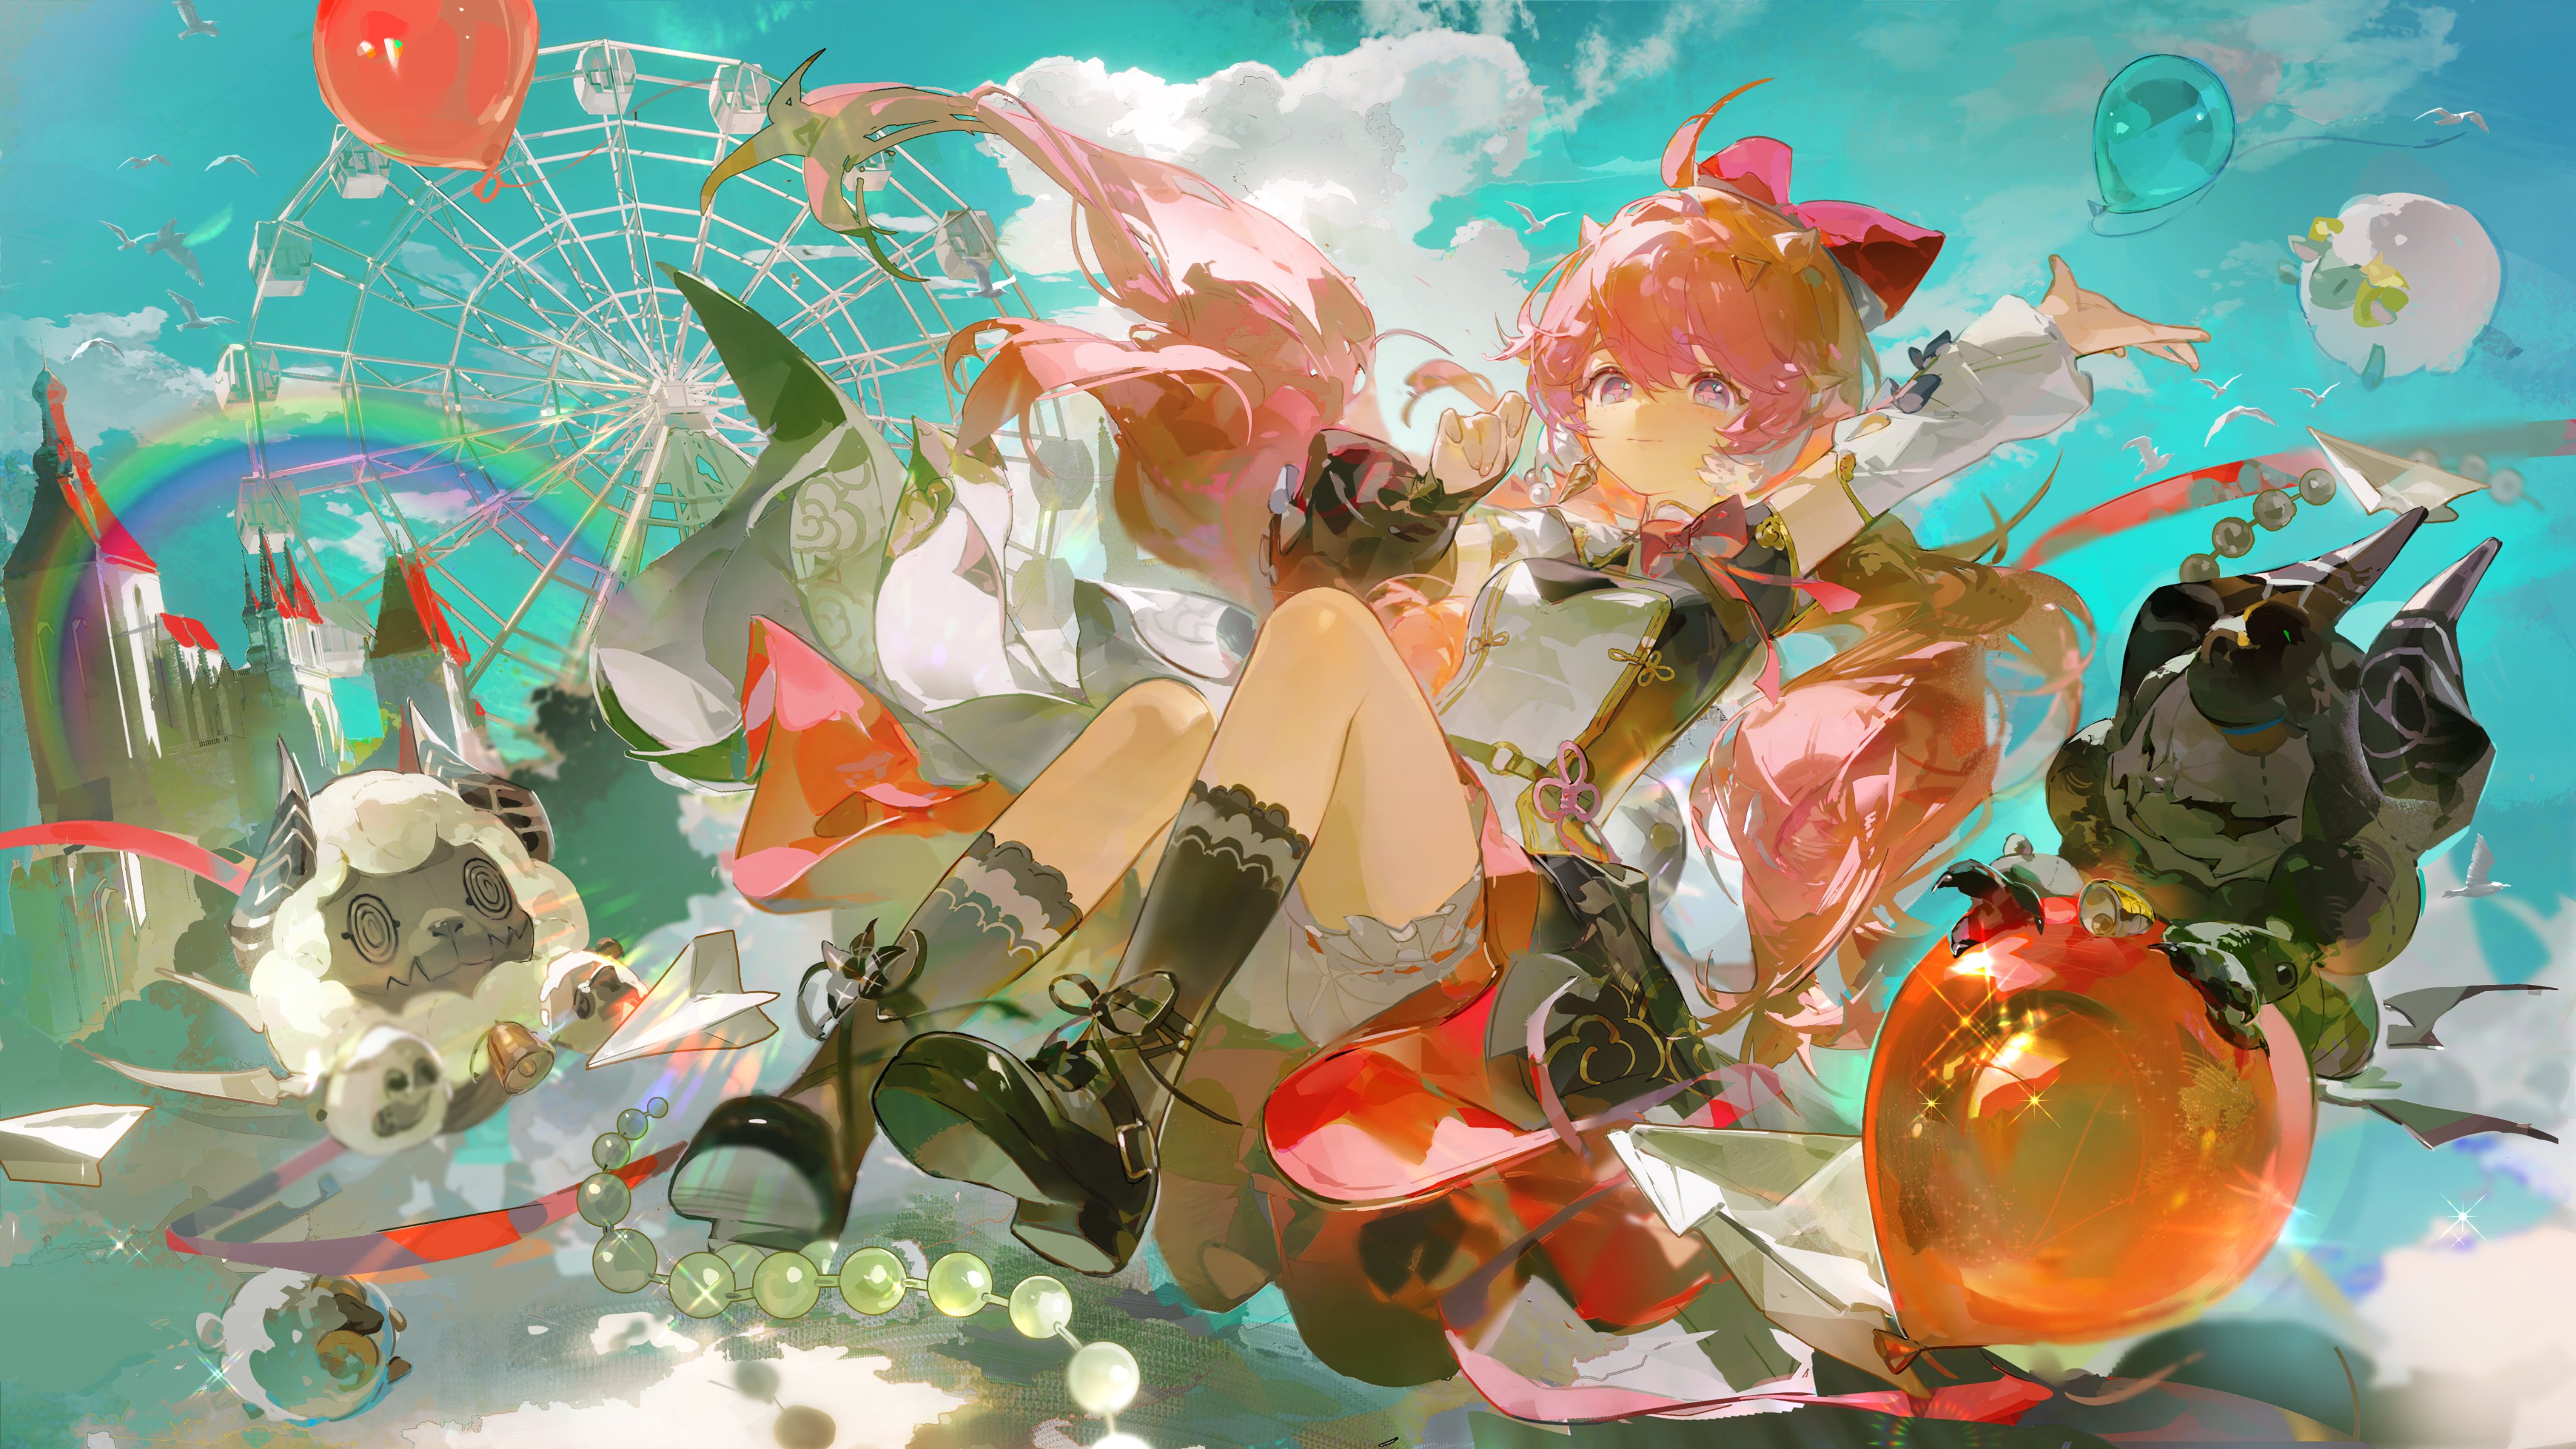 Anime 4096x2304 anime girls pink hair digital art anime games Wuthering Waves Encore (Wuthering Waves) video game art balloon ferris wheel one arm up castle sky clouds rainbows birds